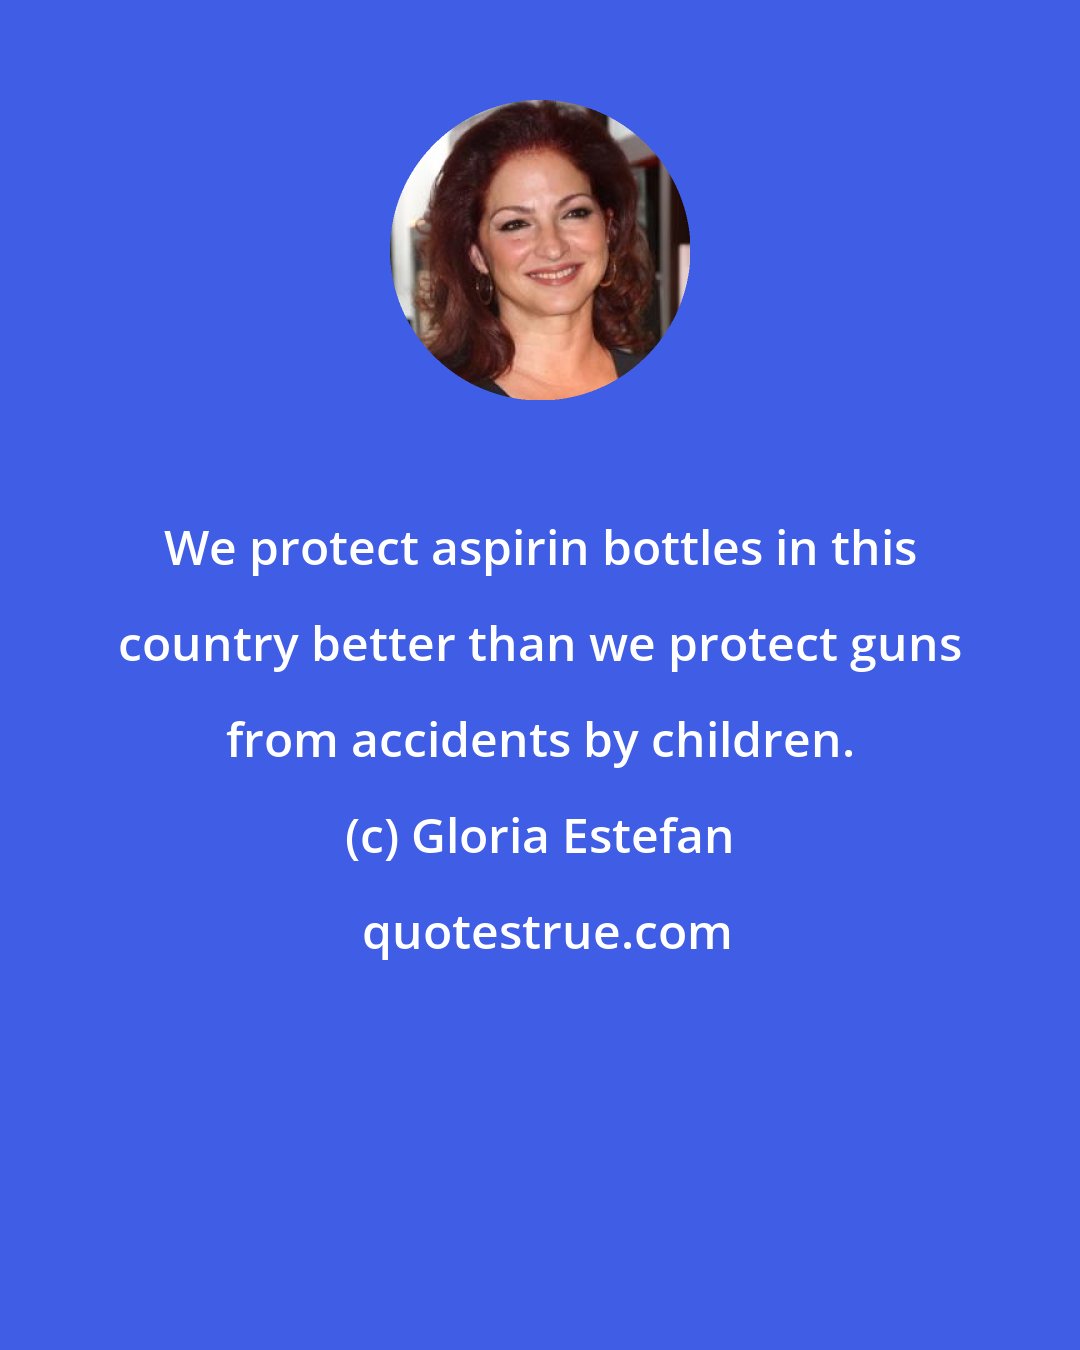 Gloria Estefan: We protect aspirin bottles in this country better than we protect guns from accidents by children.